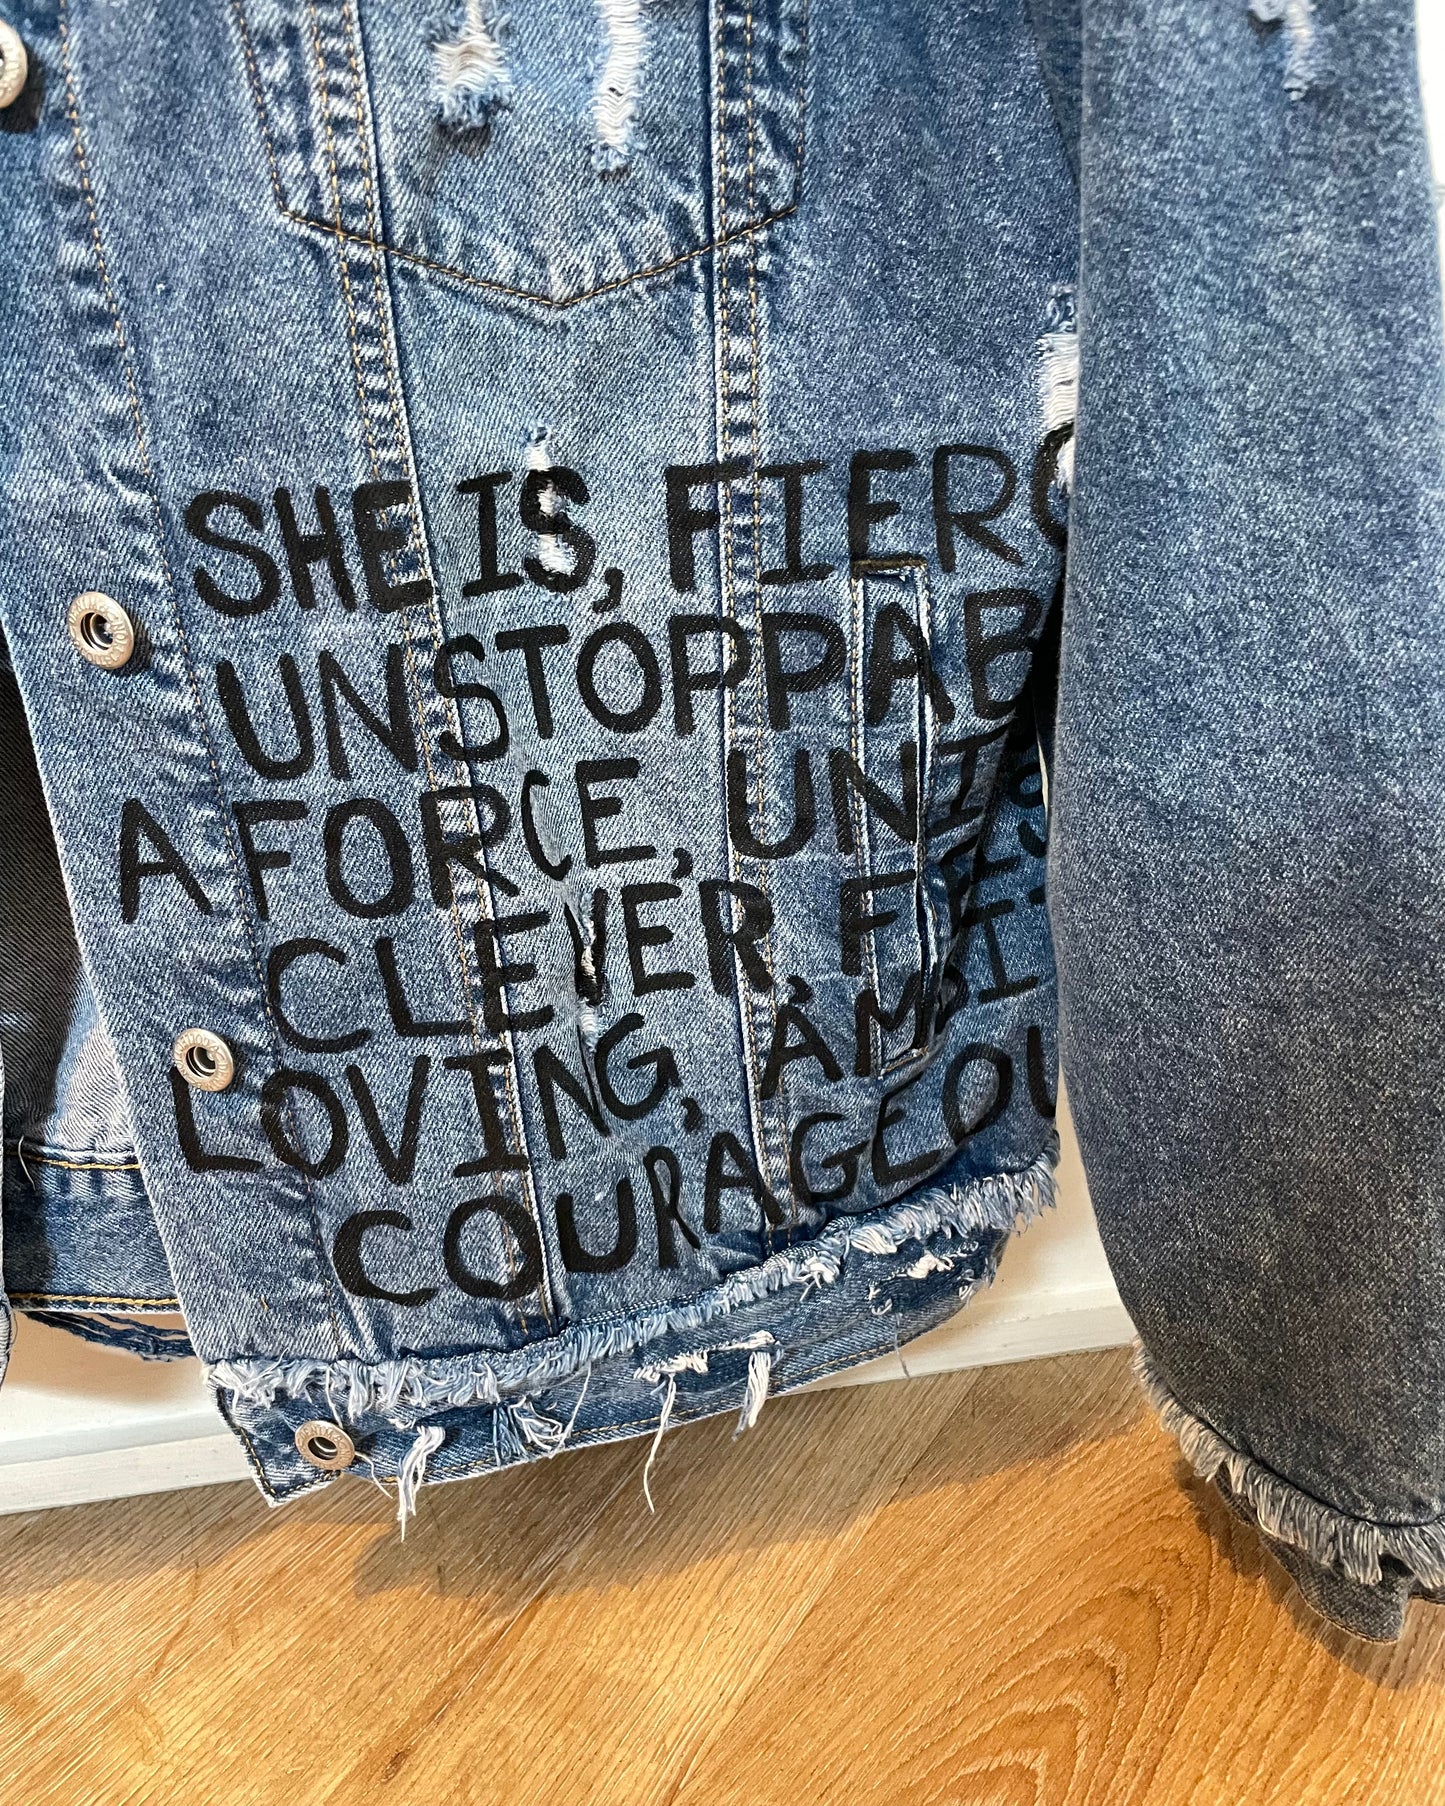 SORRY NOT SORRY - Hand painted jacket